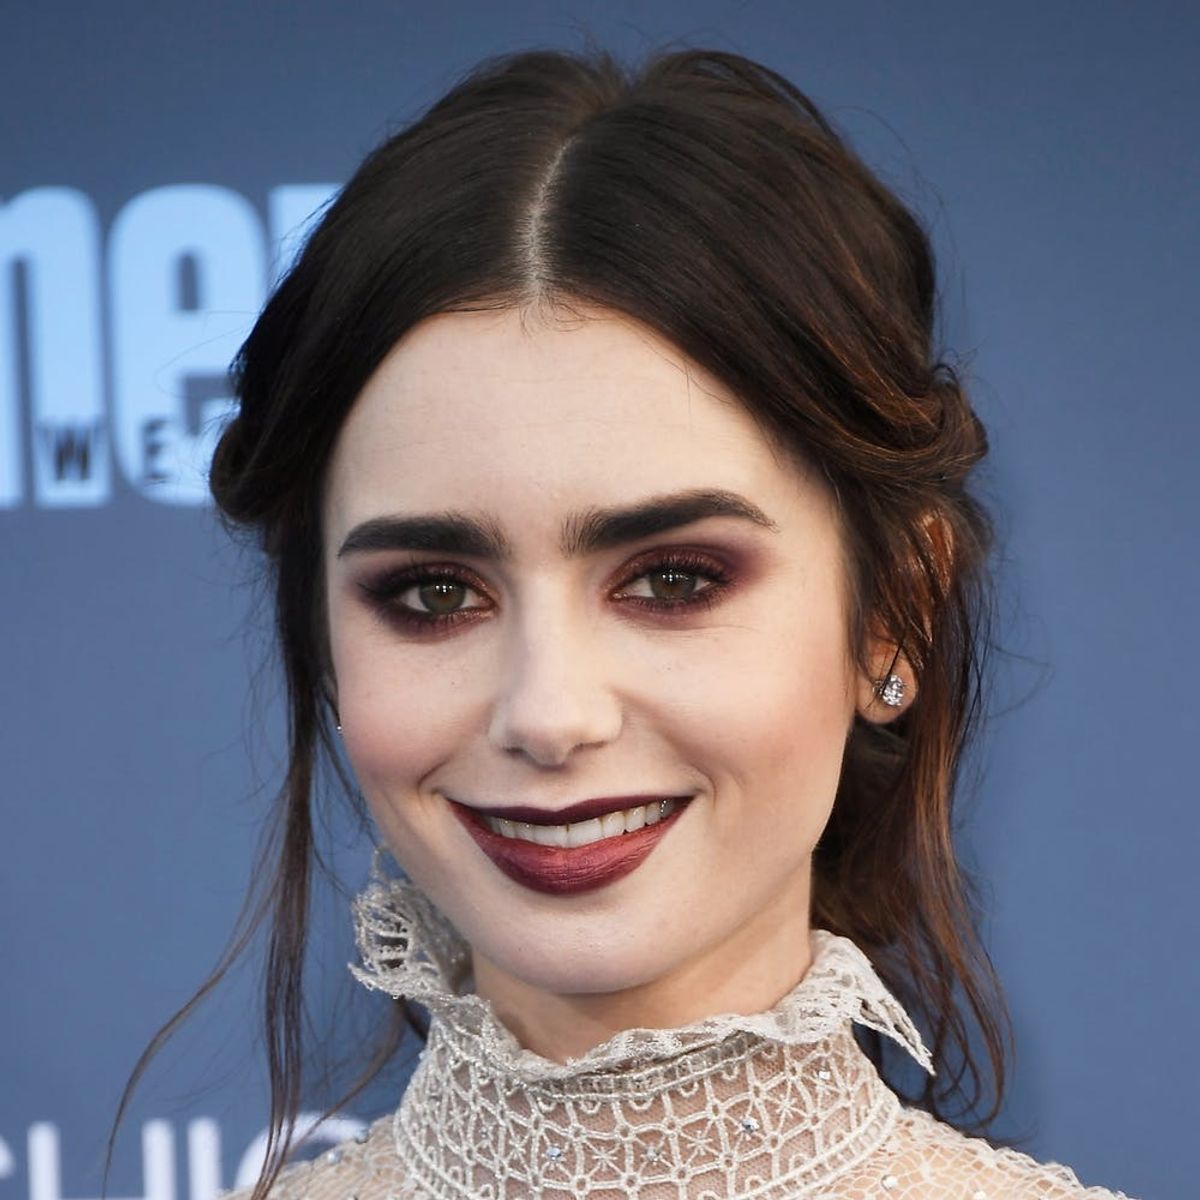 Lily Collins Cashing in on Her Harry Potter-Themed Xmas Gift Will Make You Smile